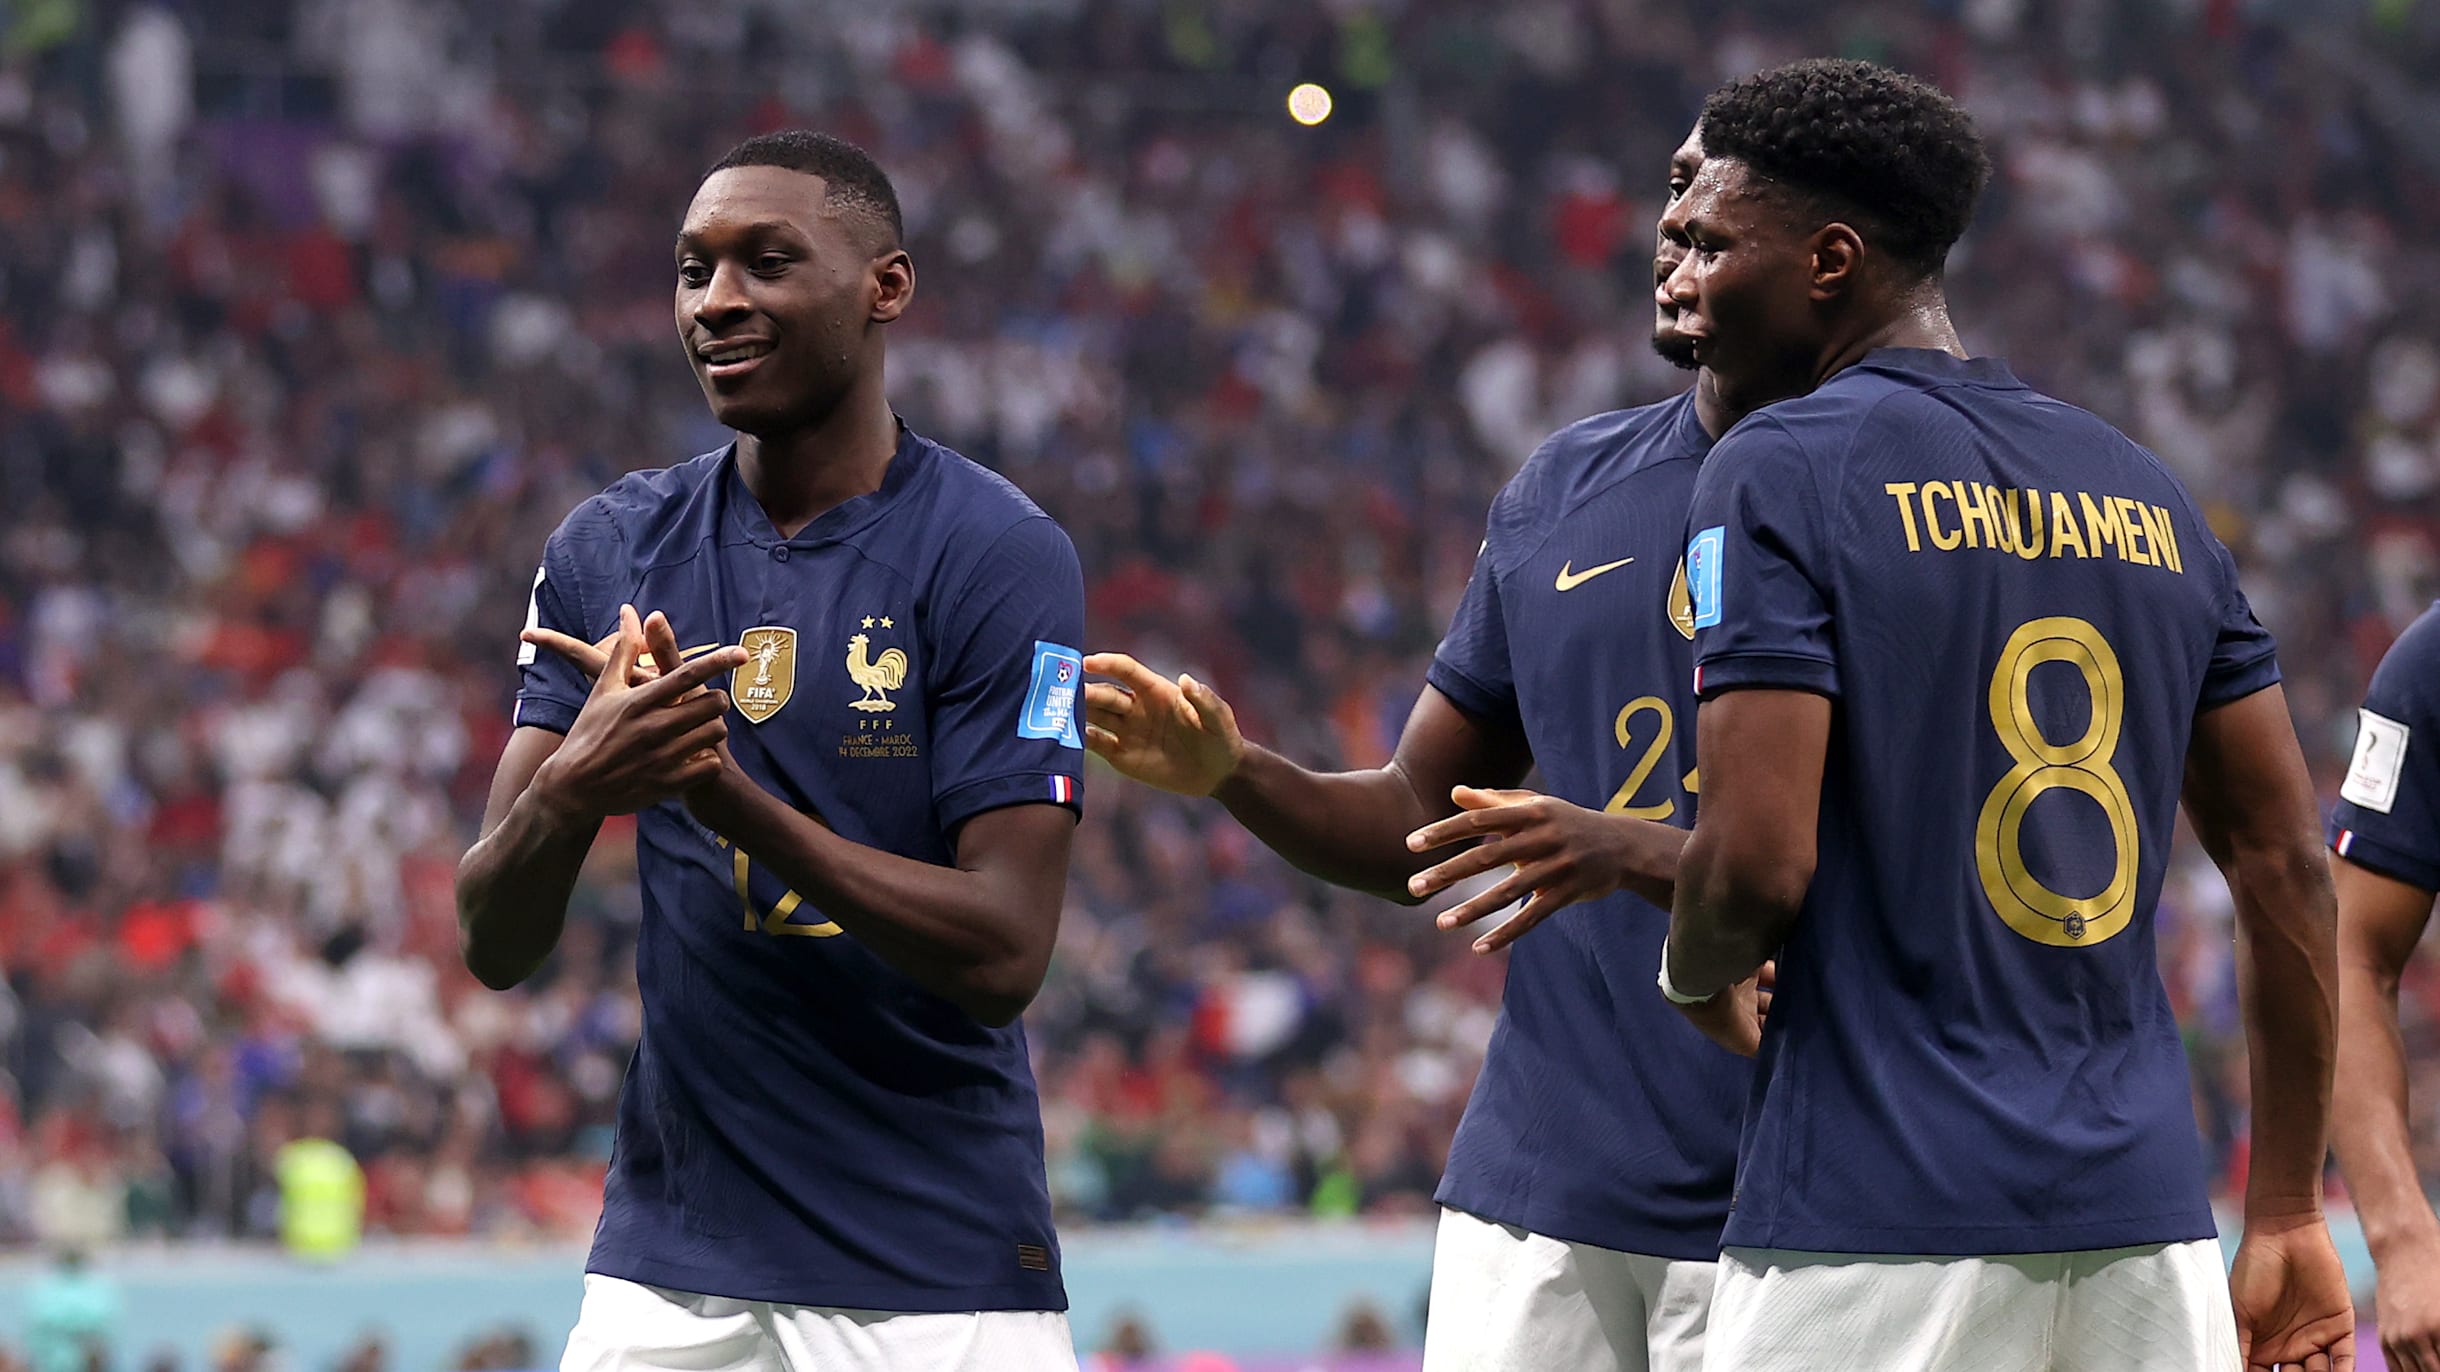 FIFA World Cup 2022 semi-finals France defeat Morocco 2-0 to reach consecutive finals